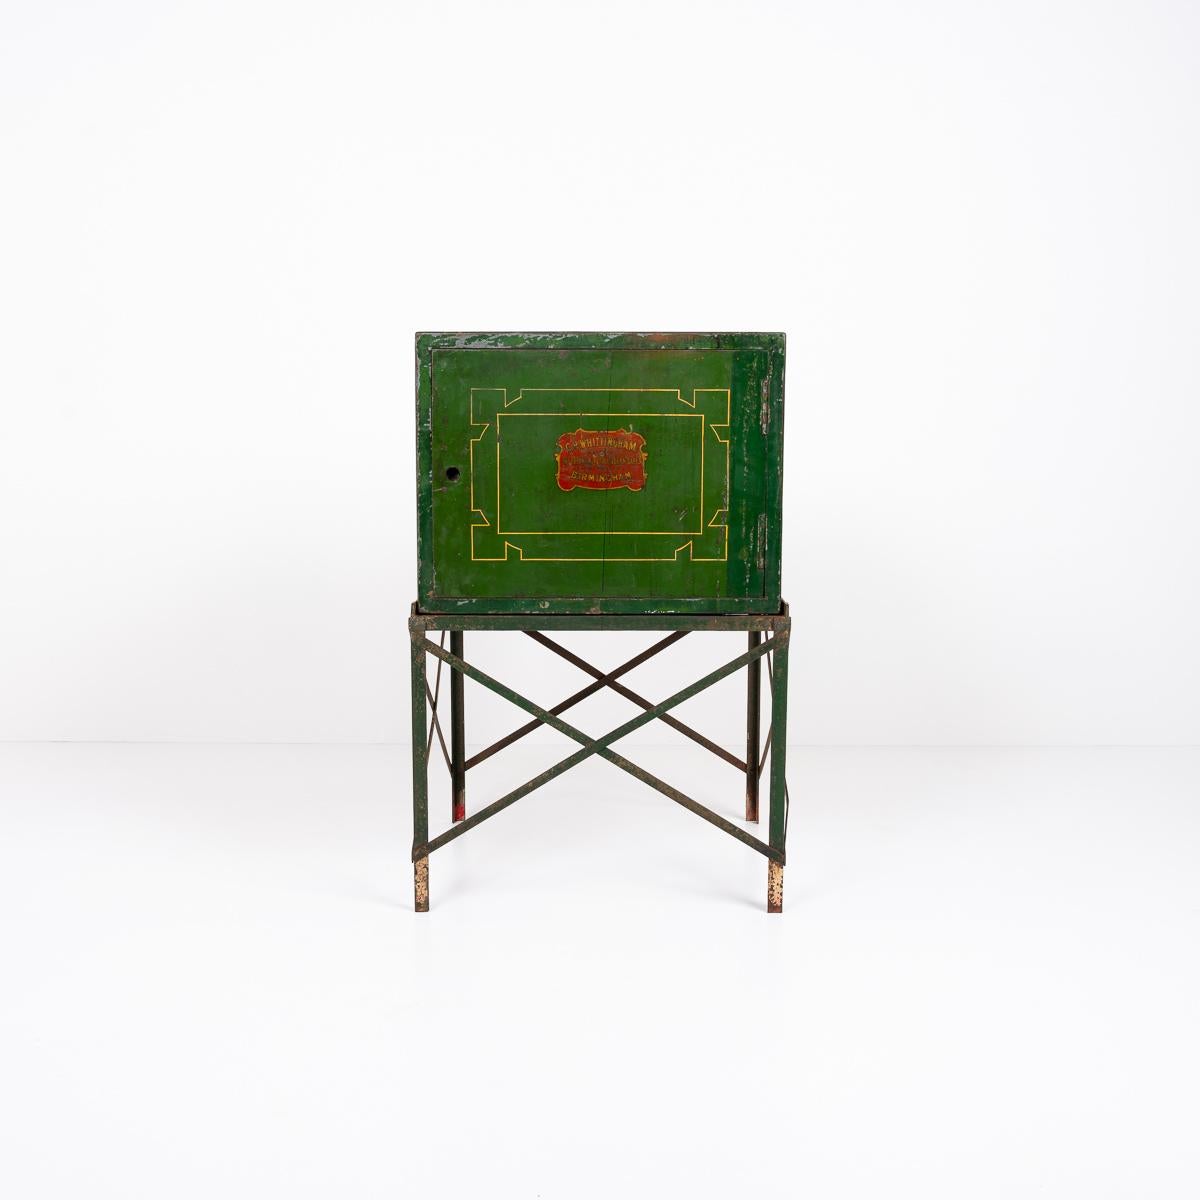 Art Deco INSPIRED Industrial STEEL DEAD CABINET

Looking for a unique and stylish storage solution? Our Art Deco green-painted steel dead cabinet from C H Whittingham Birmingham is perfect. Crafted in England in 1920.

The highlight of this